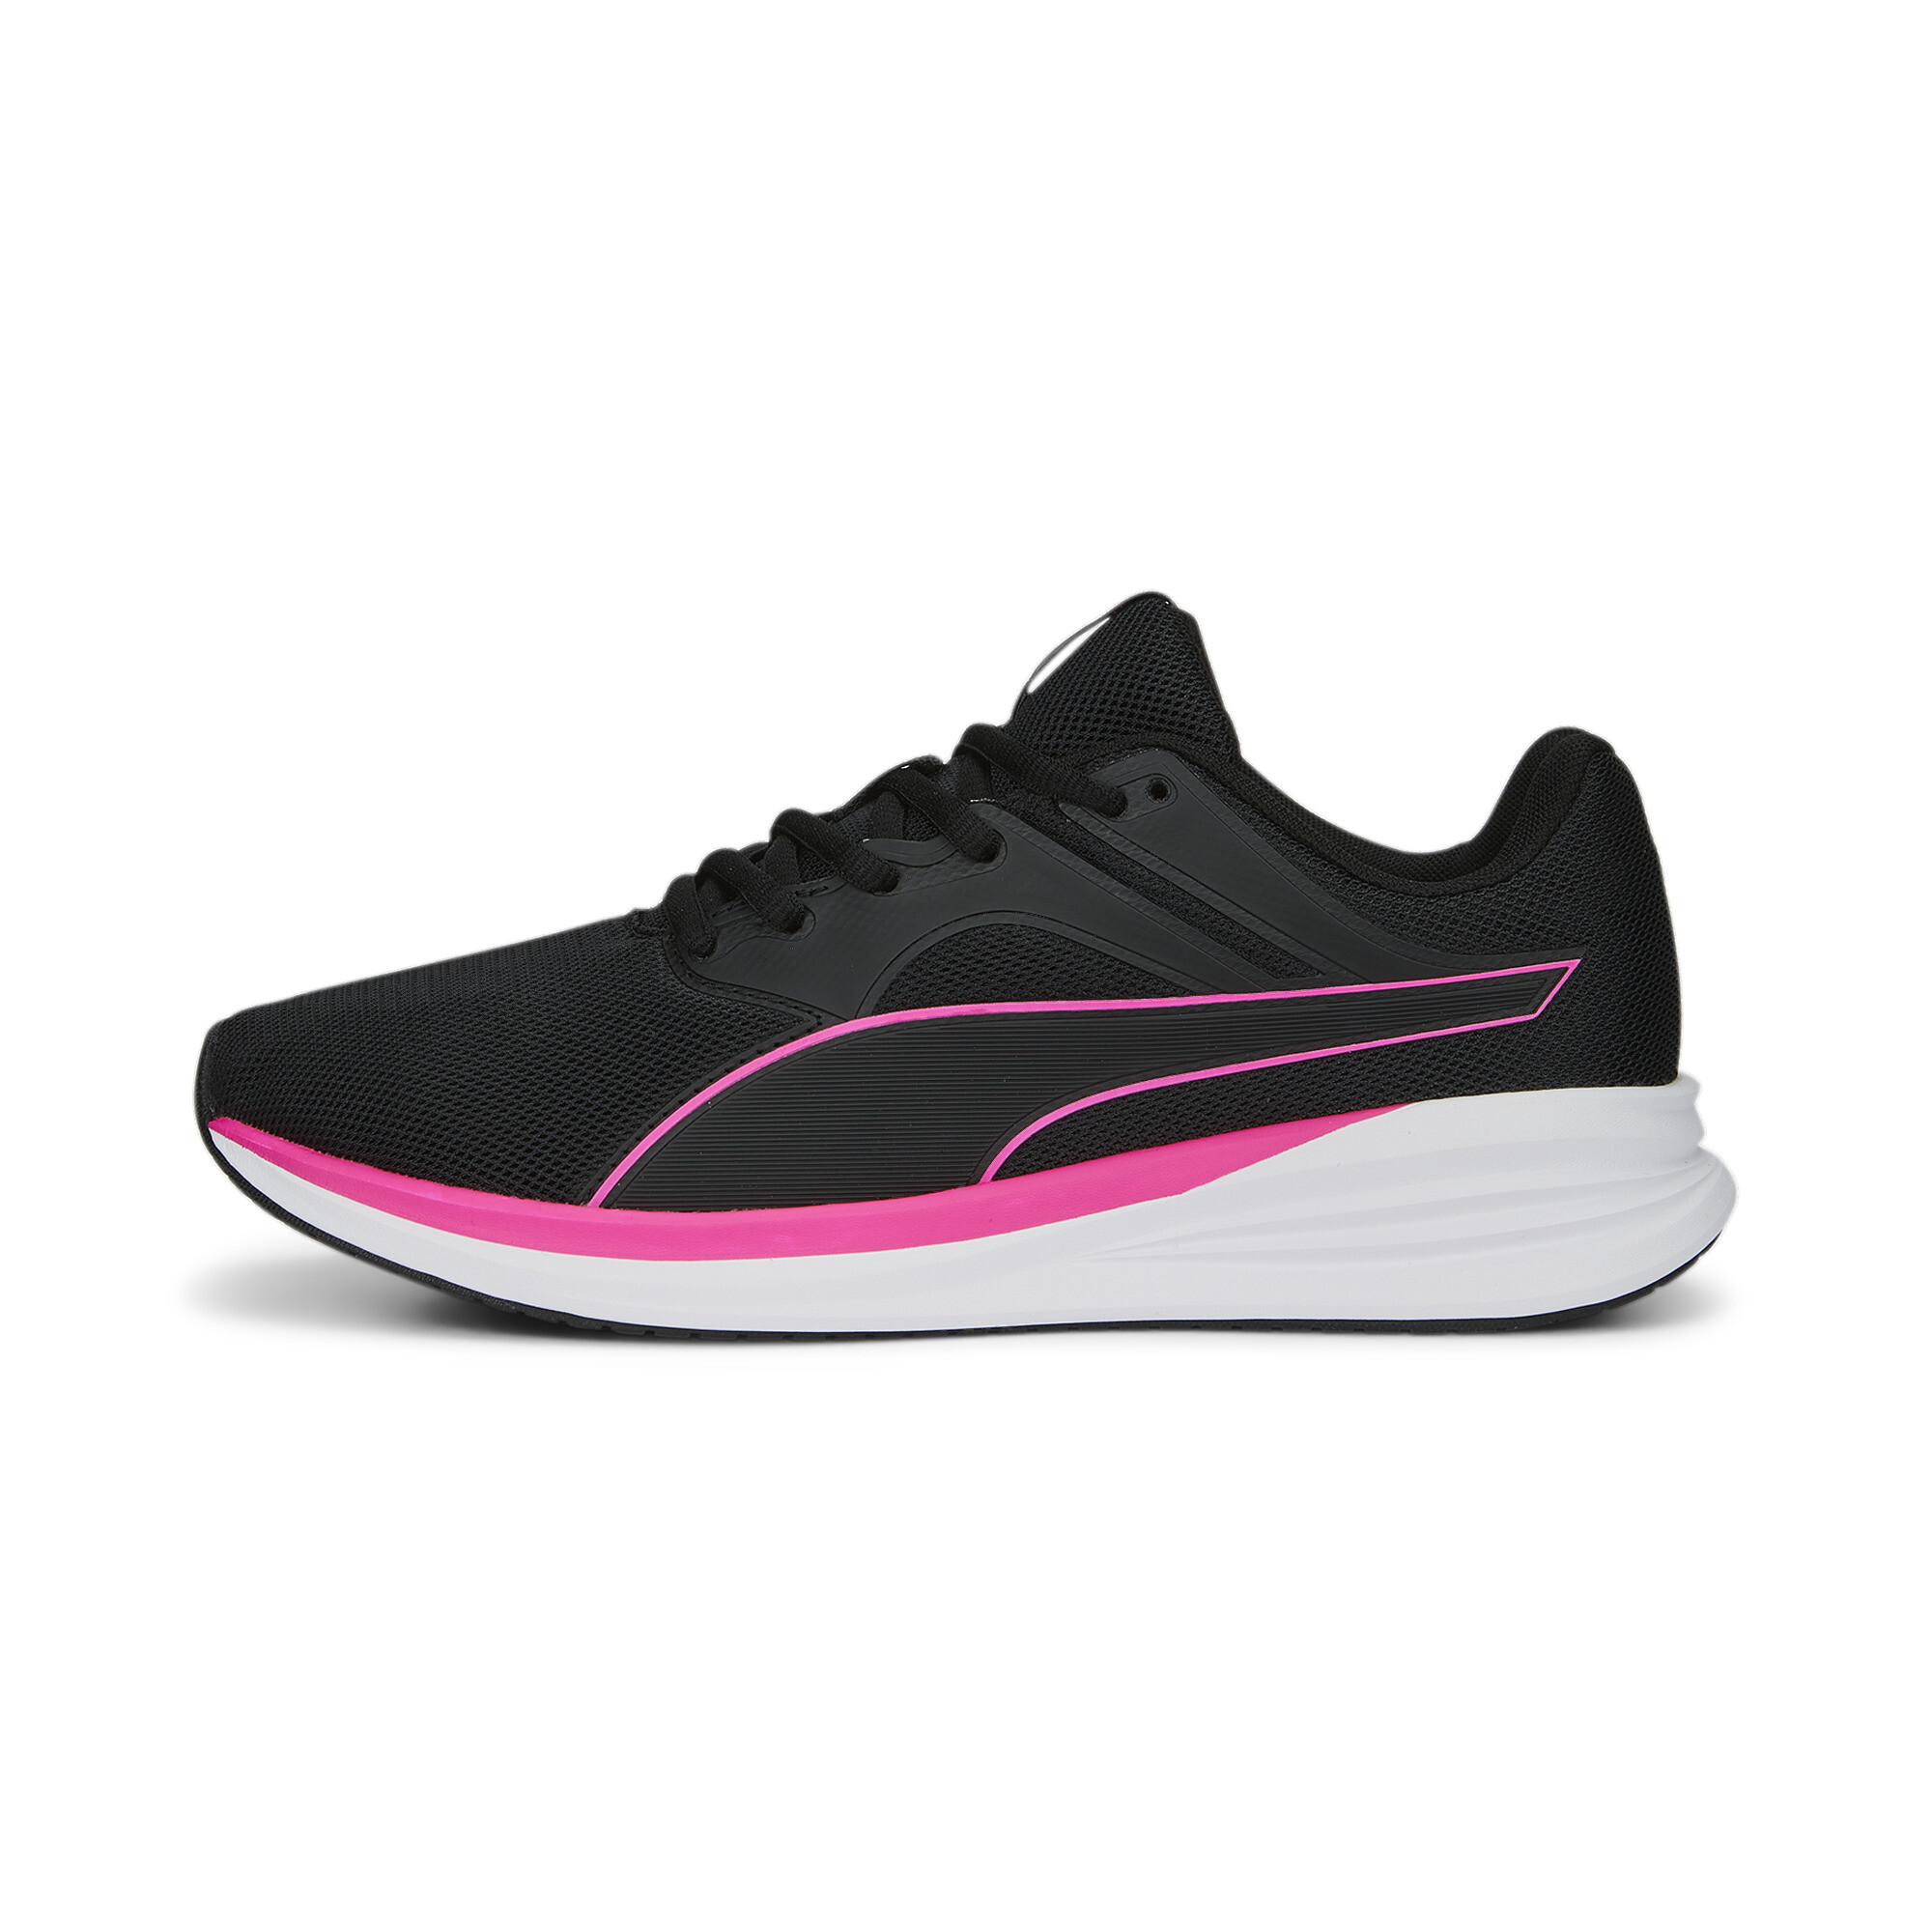 Puma Transport Running Shoes, Black, Size 42, Shoes